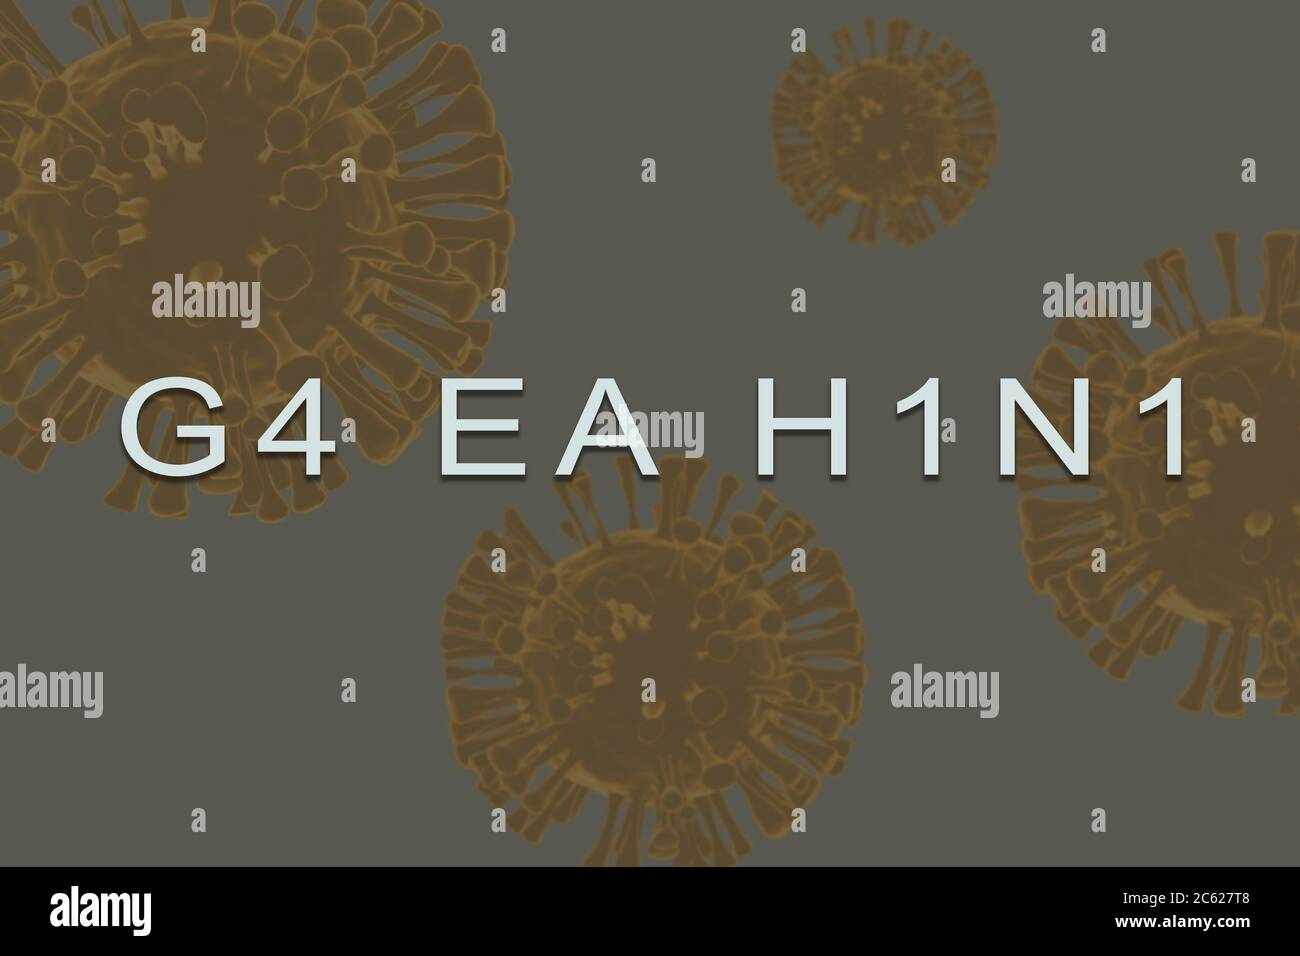 Inscription text of new virus called G4 EA H1N1 with 3d rendered illustration virus as background Stock Photo